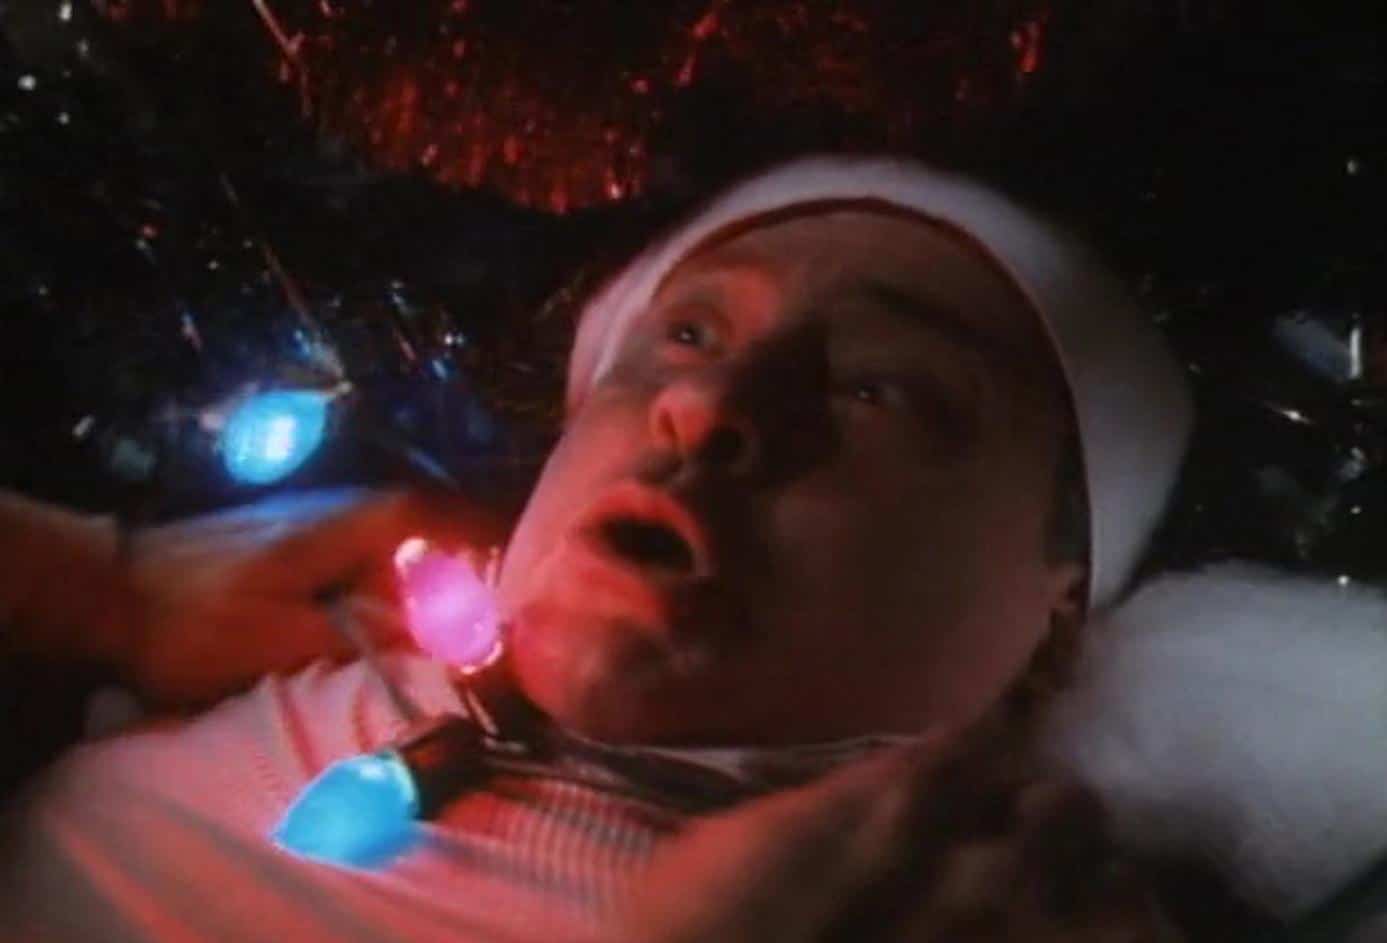 Silent Night Deadly Night 4: Initiation